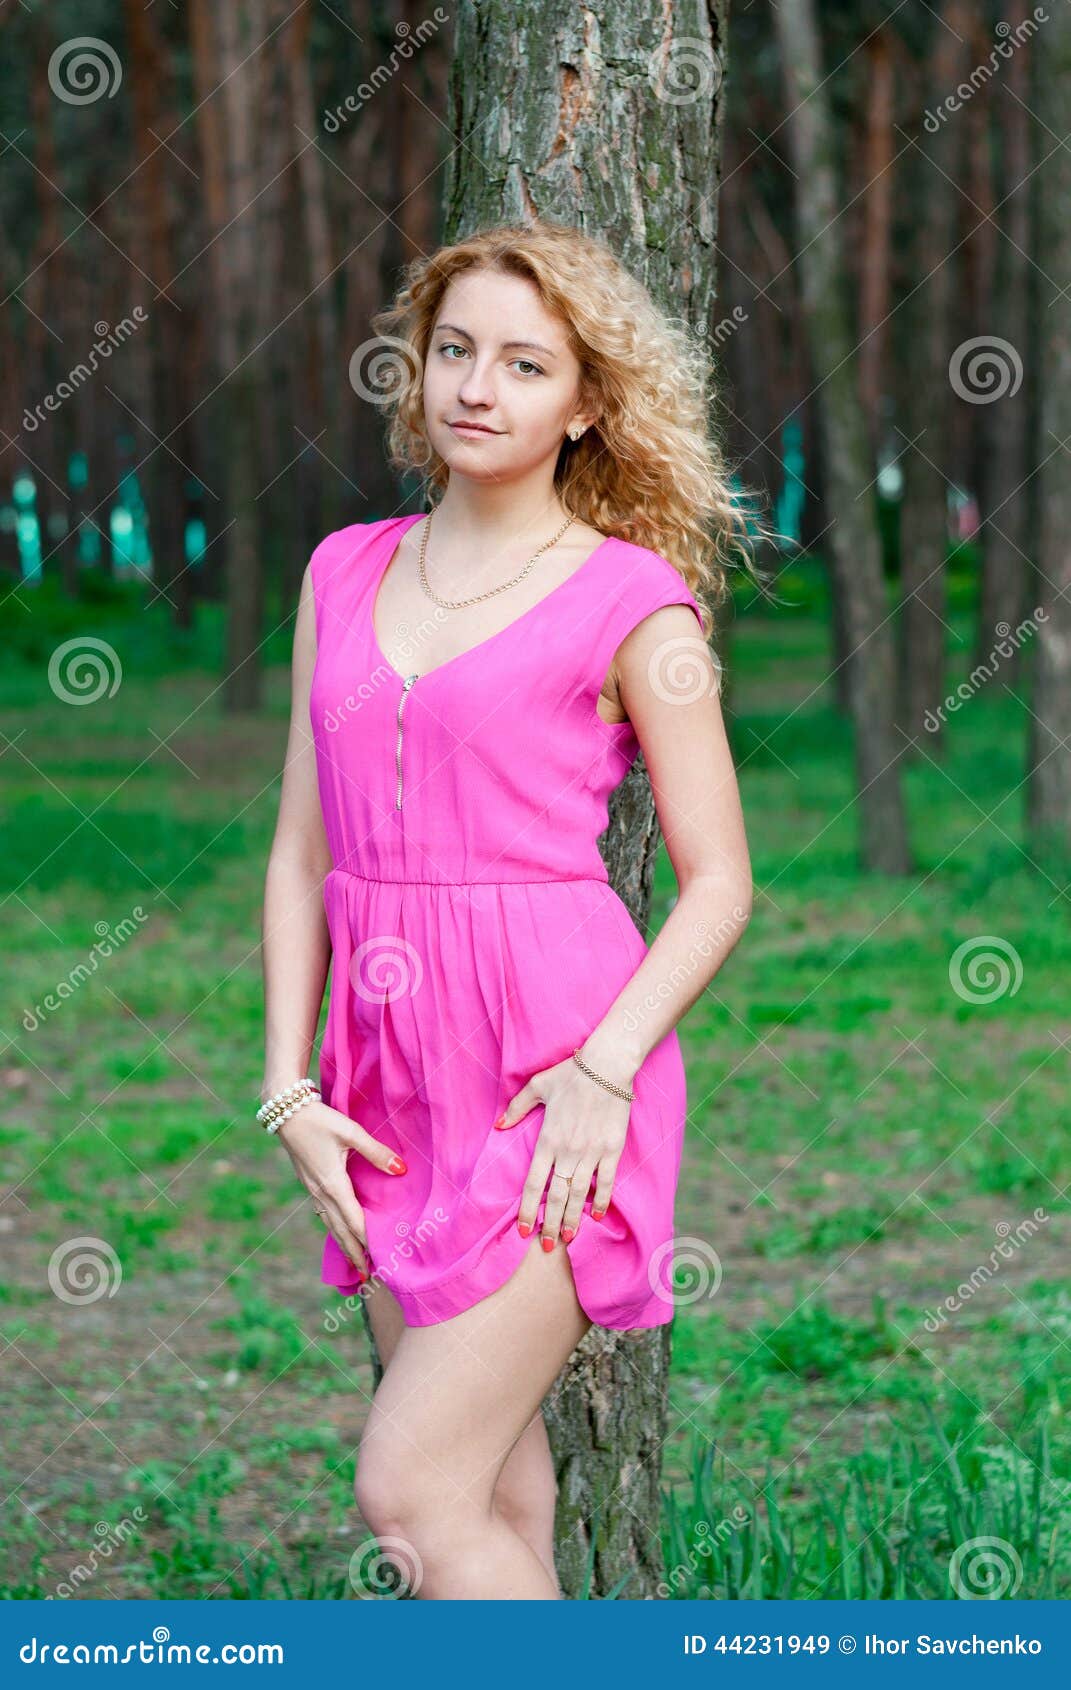 Slender Girl in Red Dress Near Tree Stock Image - Image of pretty ...